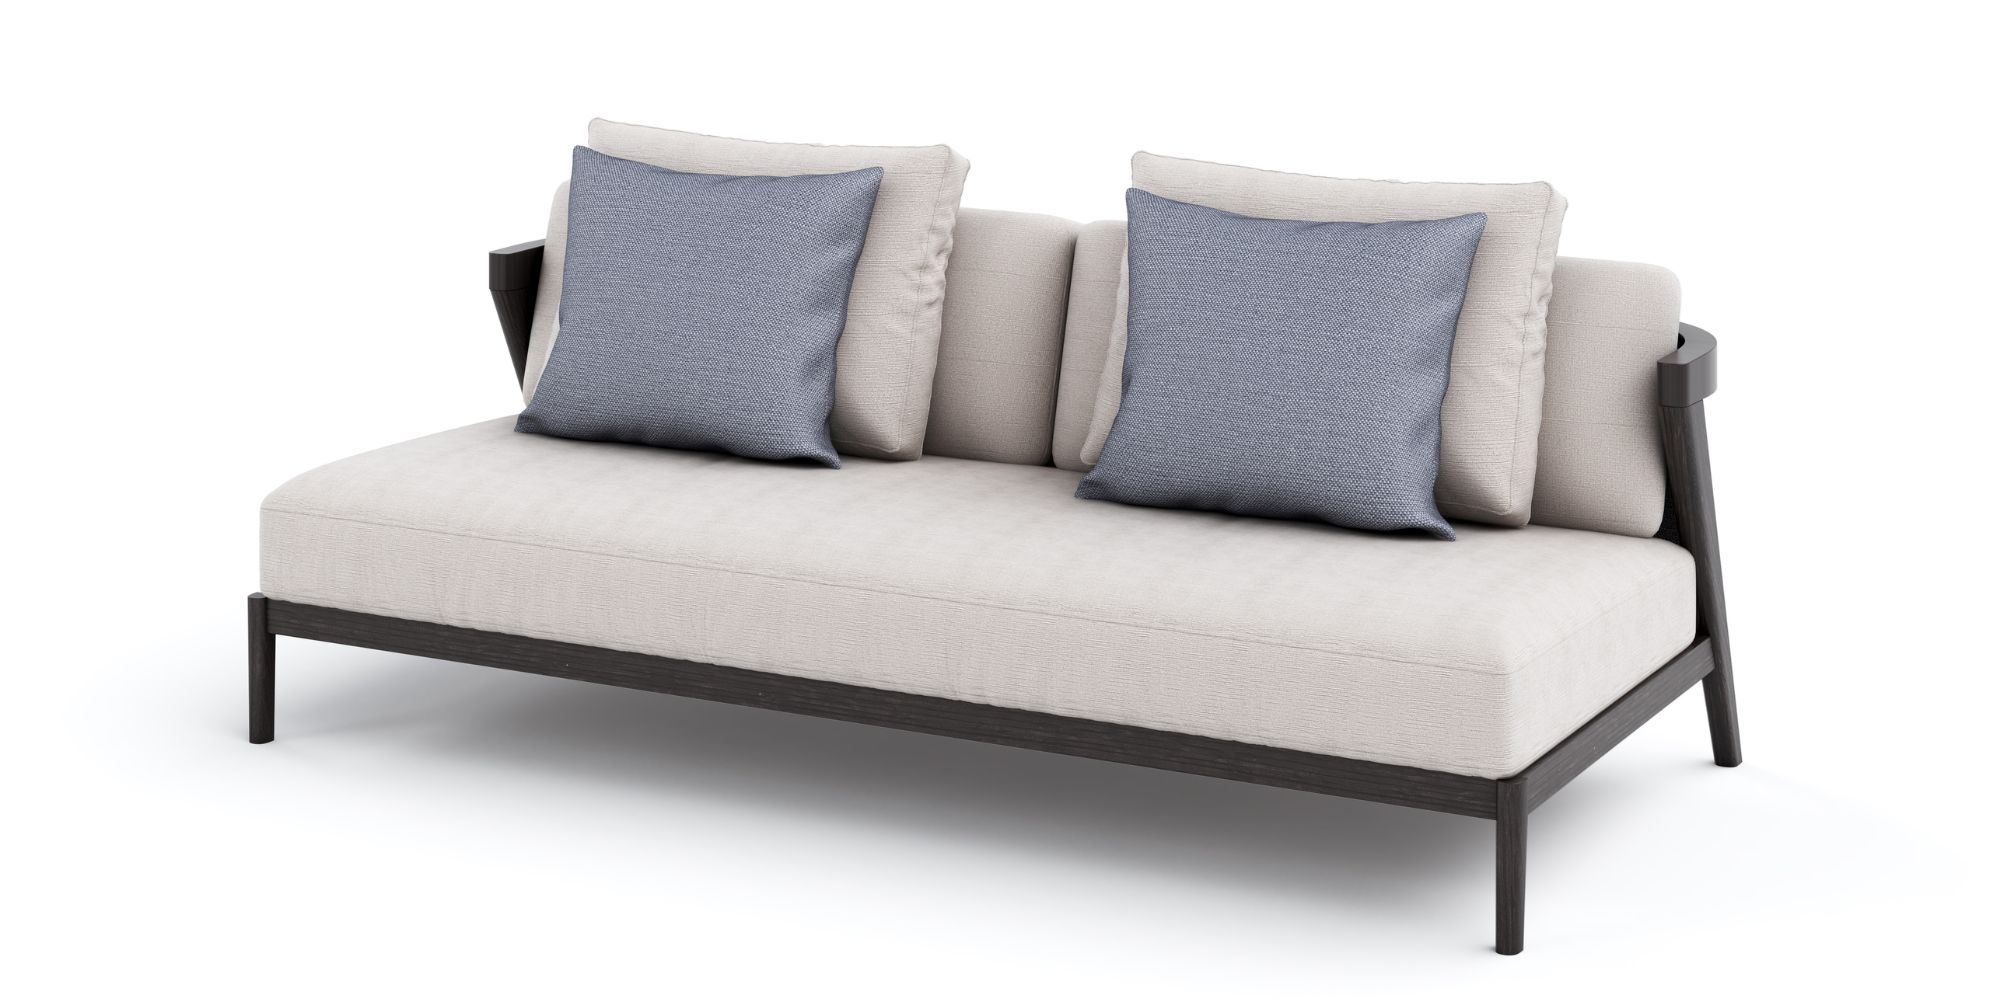 Porto Left Arm/End Section 3 Seater in Outdoor Modular Sofas for Porto collection